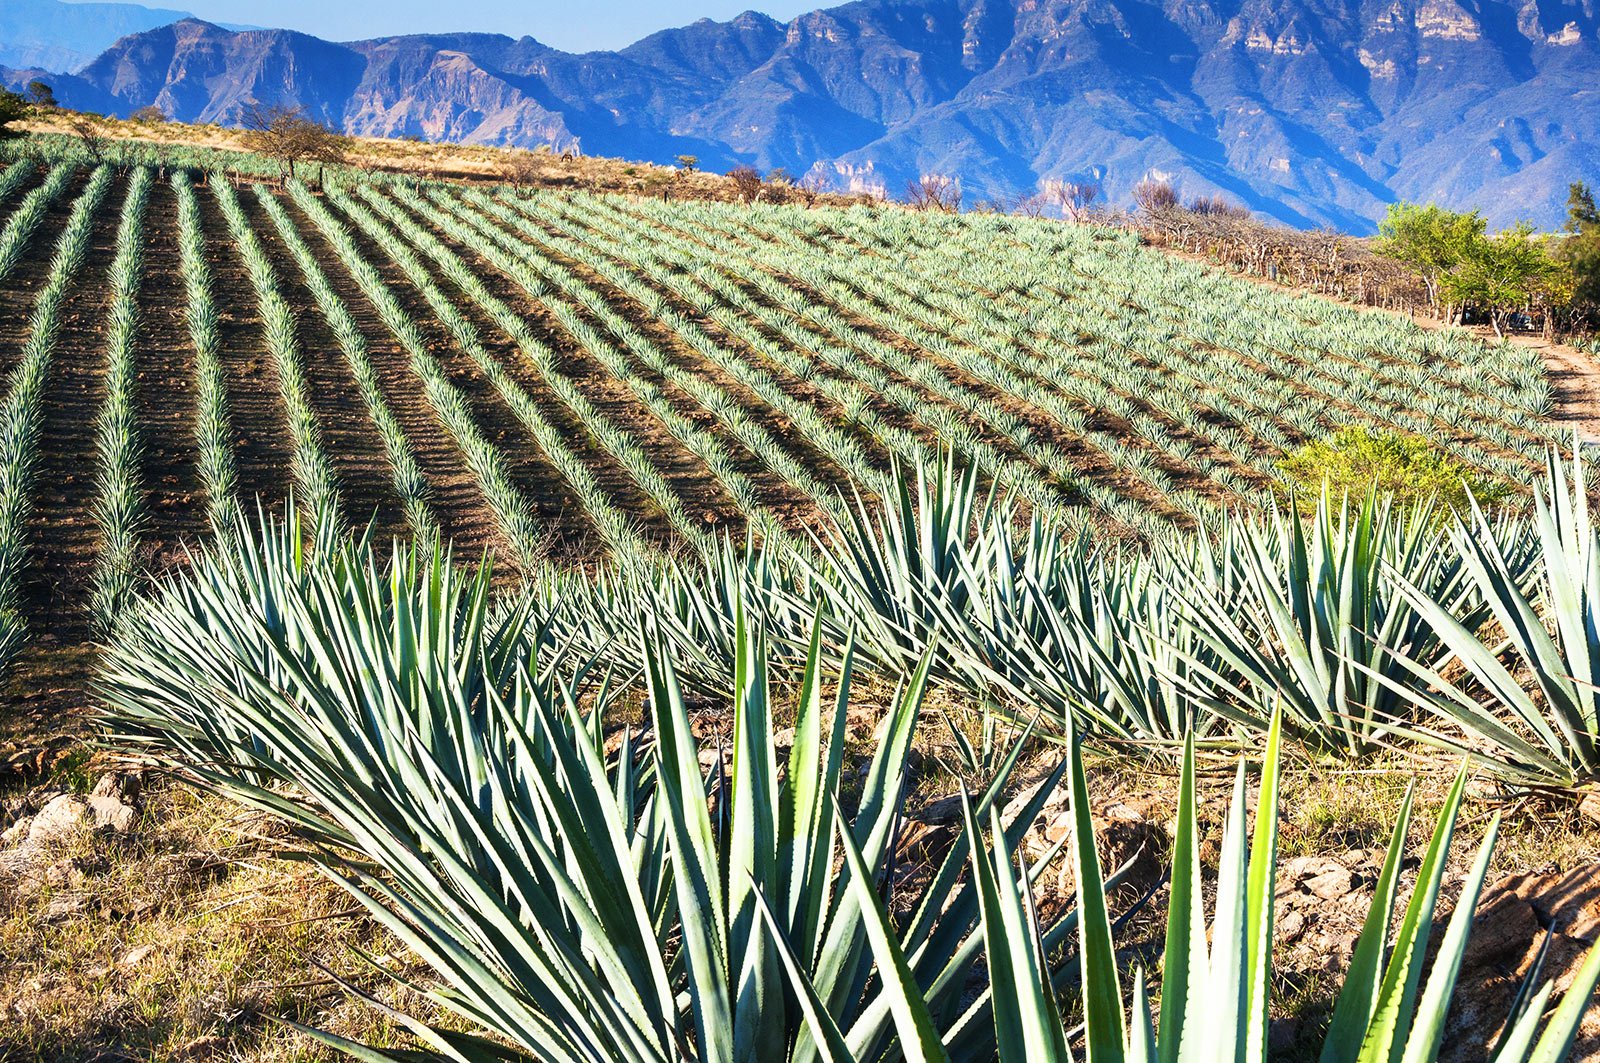 How to find out how they produce tequila in Guadalajara